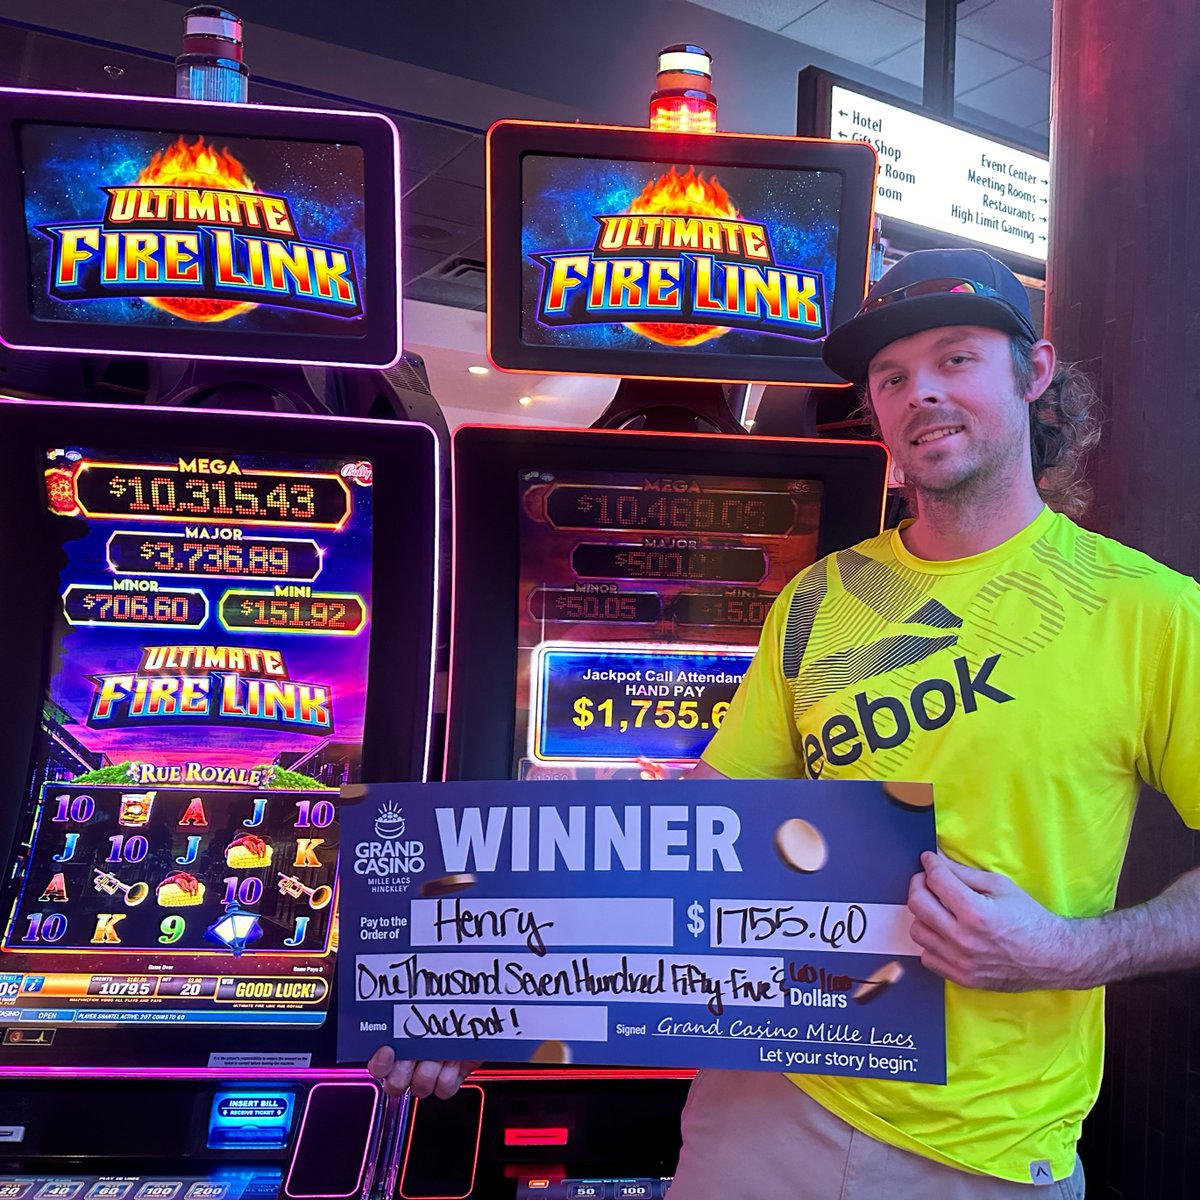 Nothing says welcome to the winner’s circle like a jackpot. Happy Winner Wednesday! 🎰 

#WinnerWednesday #Jackpot #Slots #CasinoWins #SlotMachines #Wins